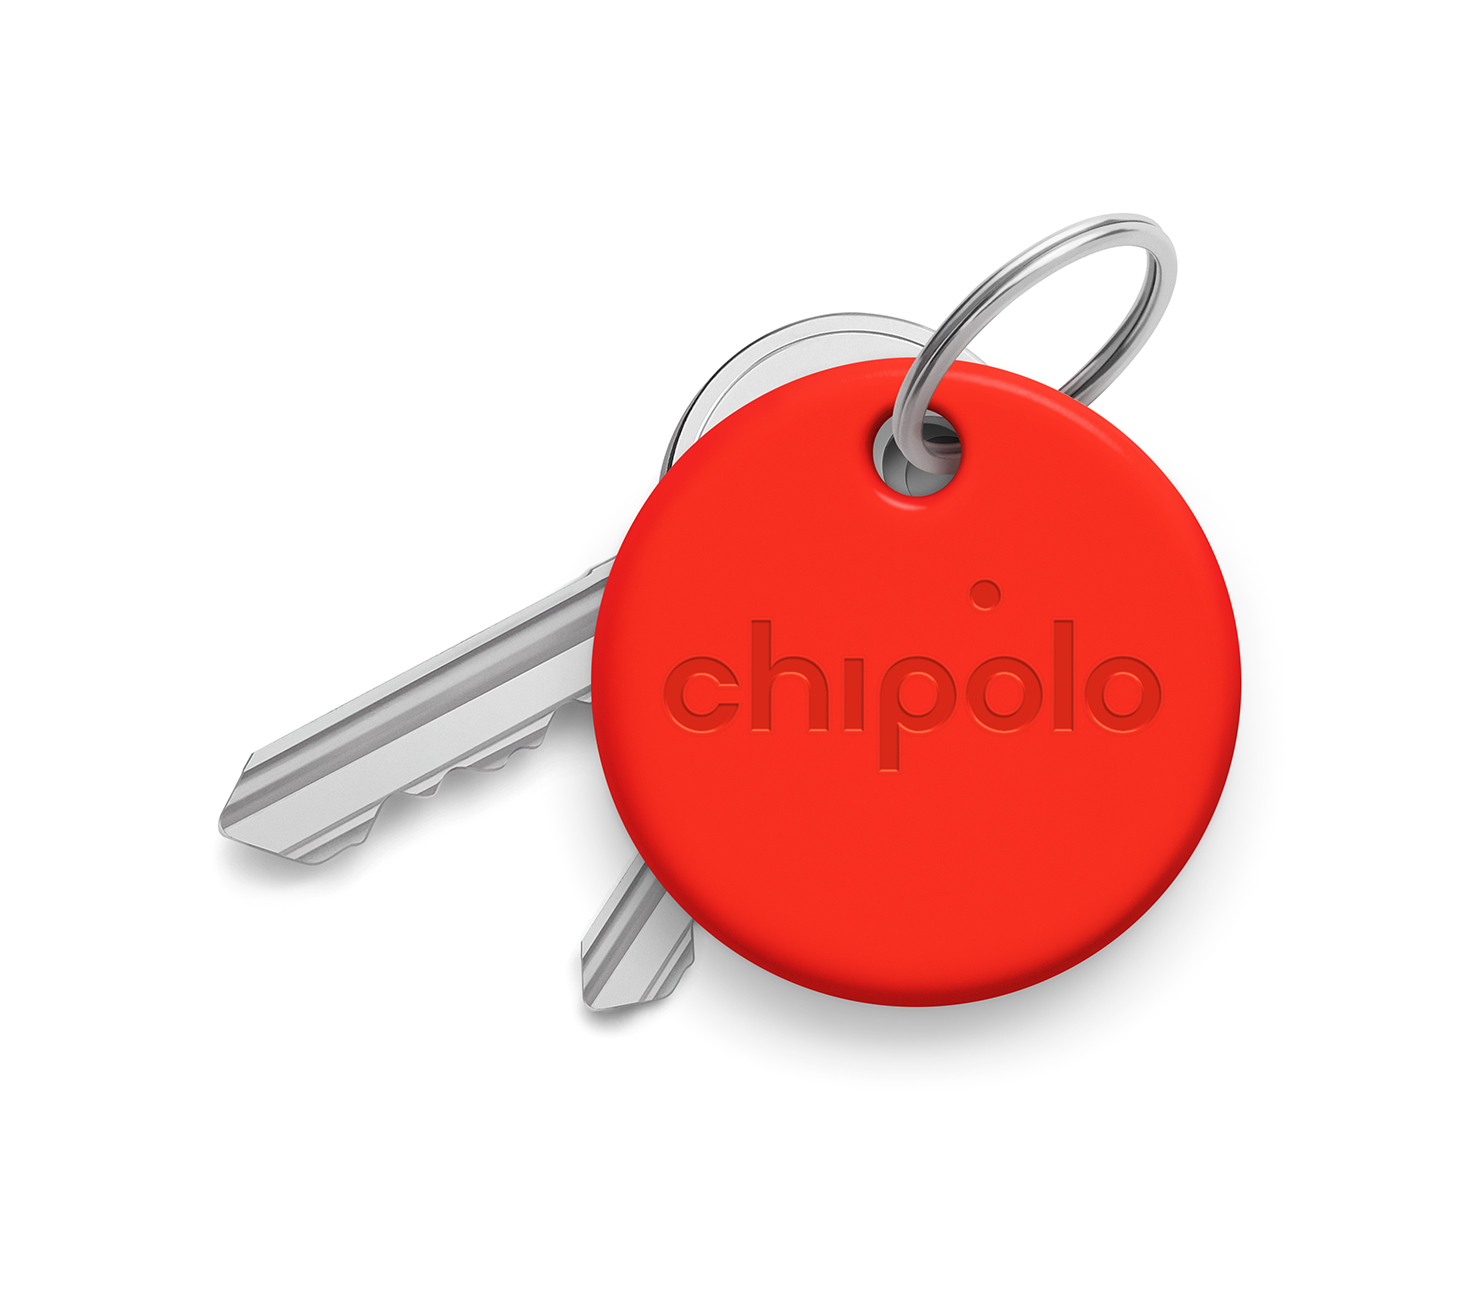 Chipolo ONE in red